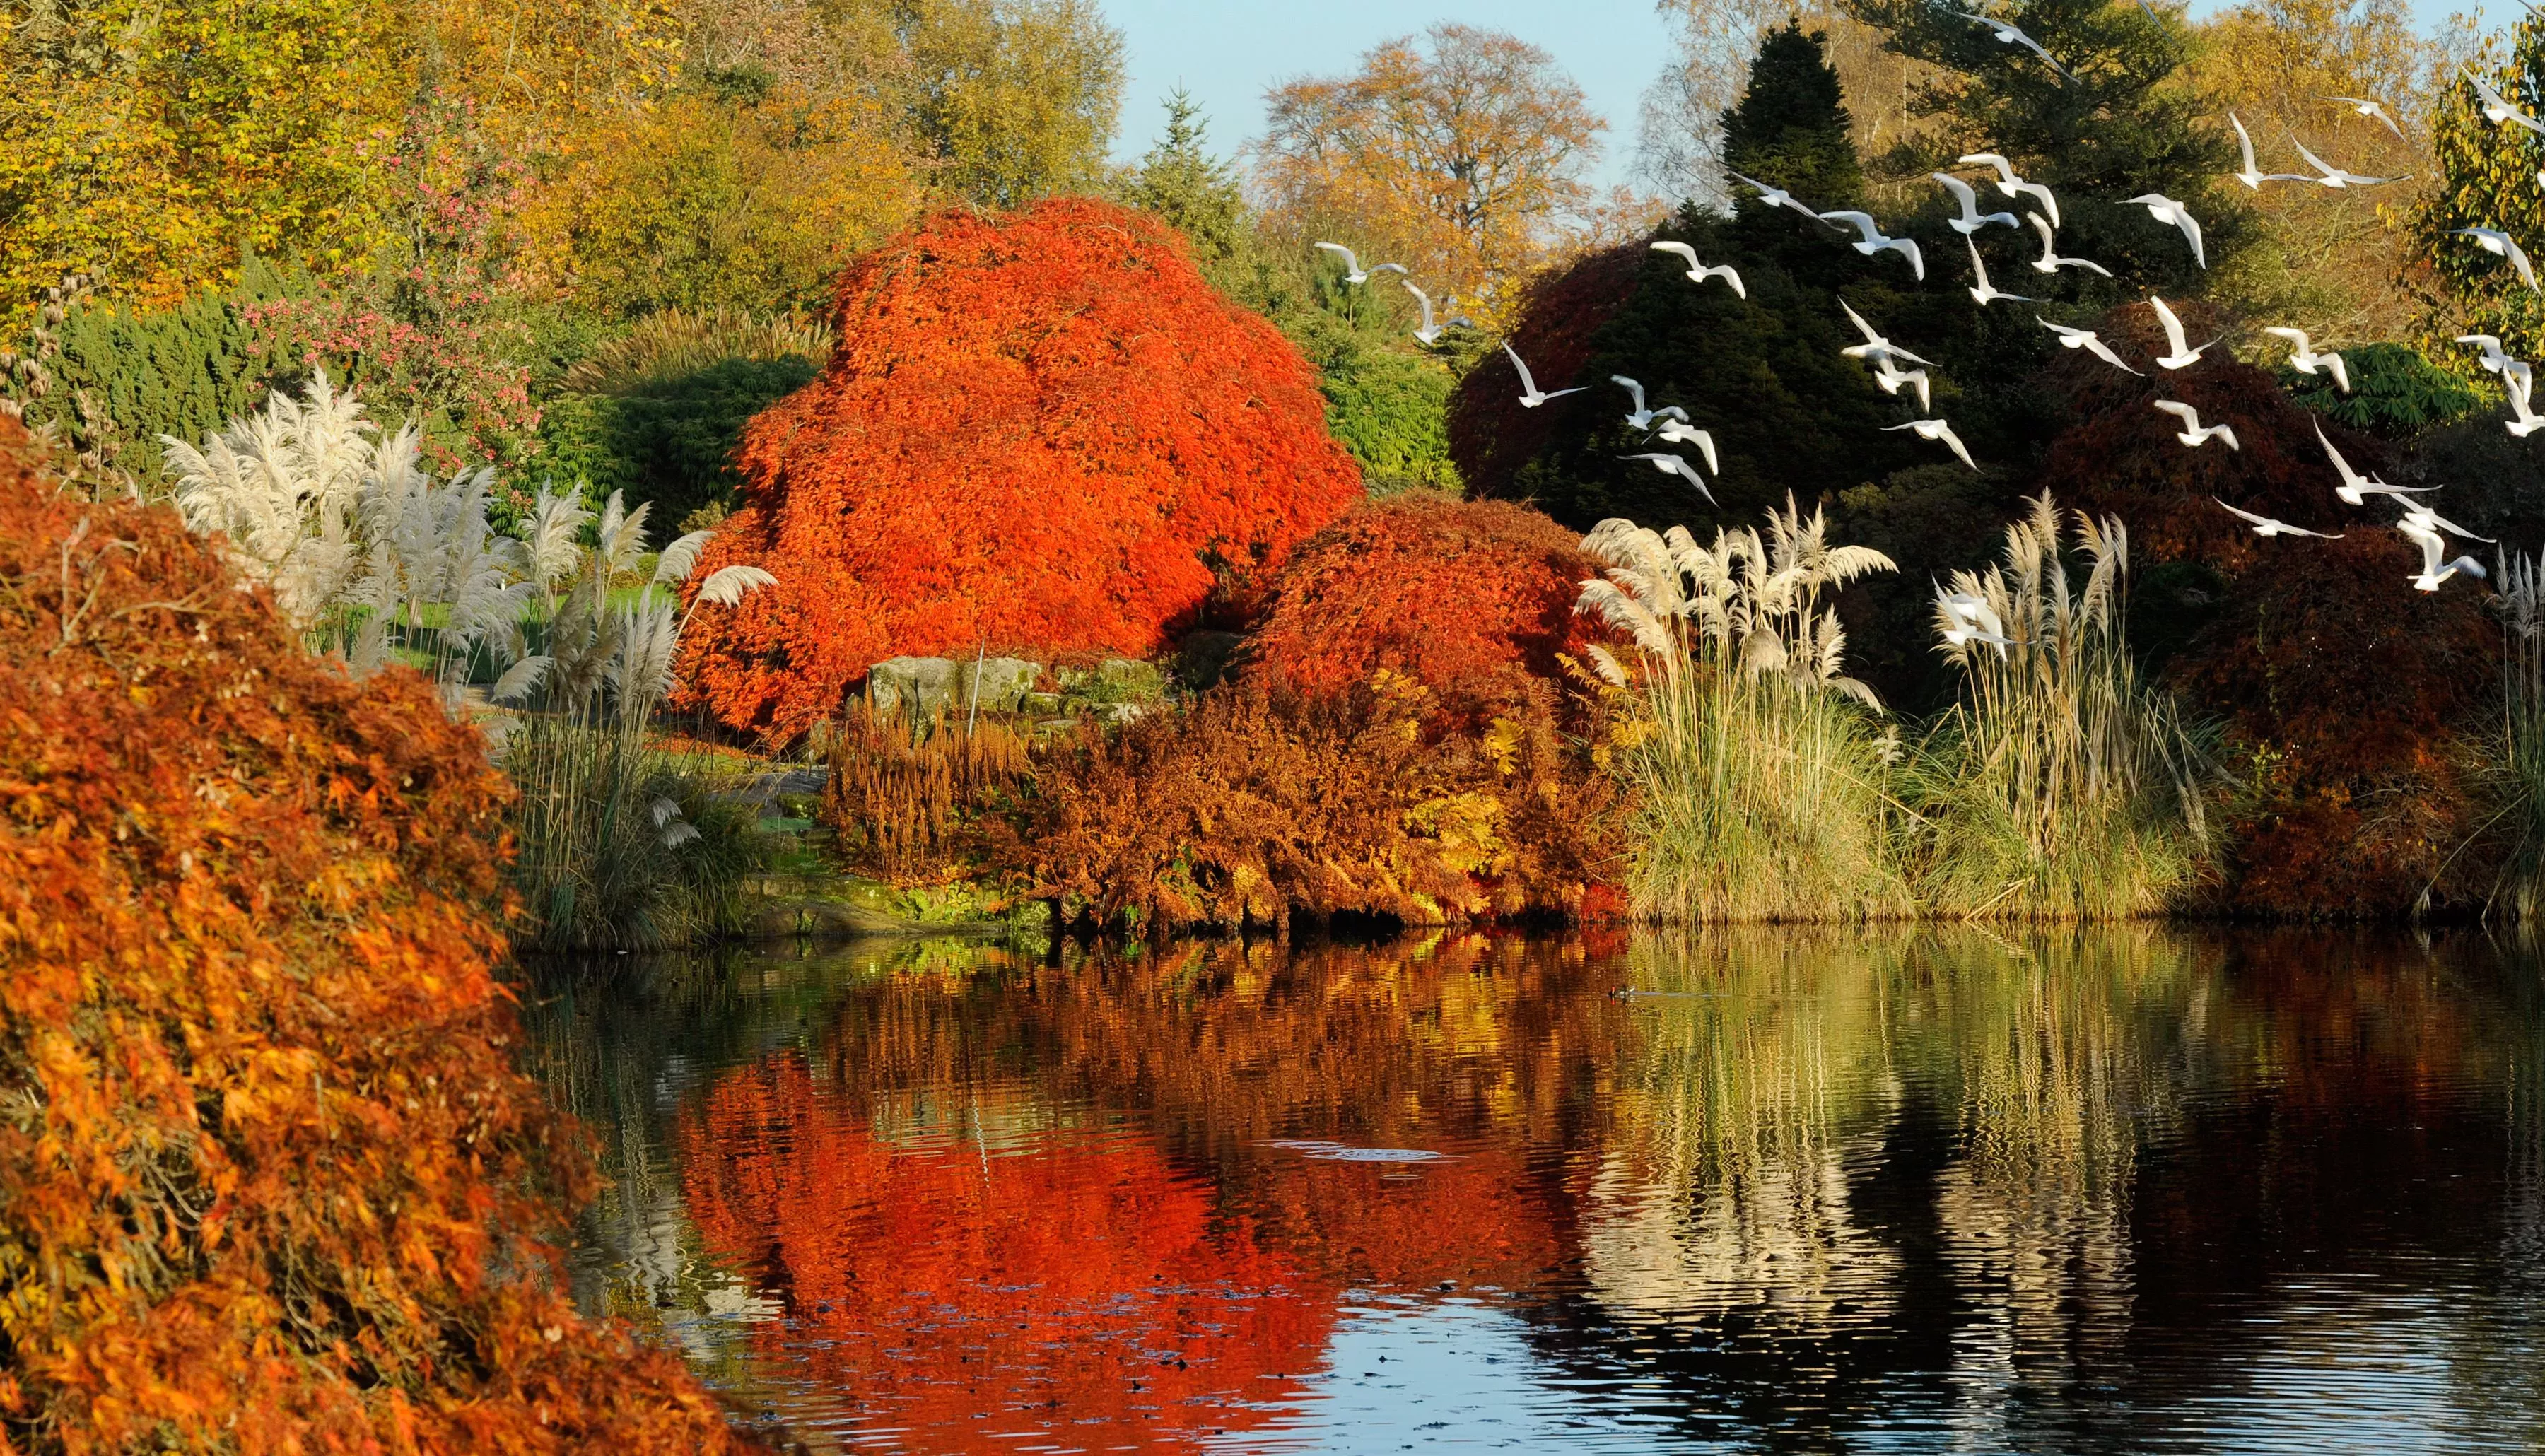 The colours of autumn are reflected in the lake as a flock of birds fly past